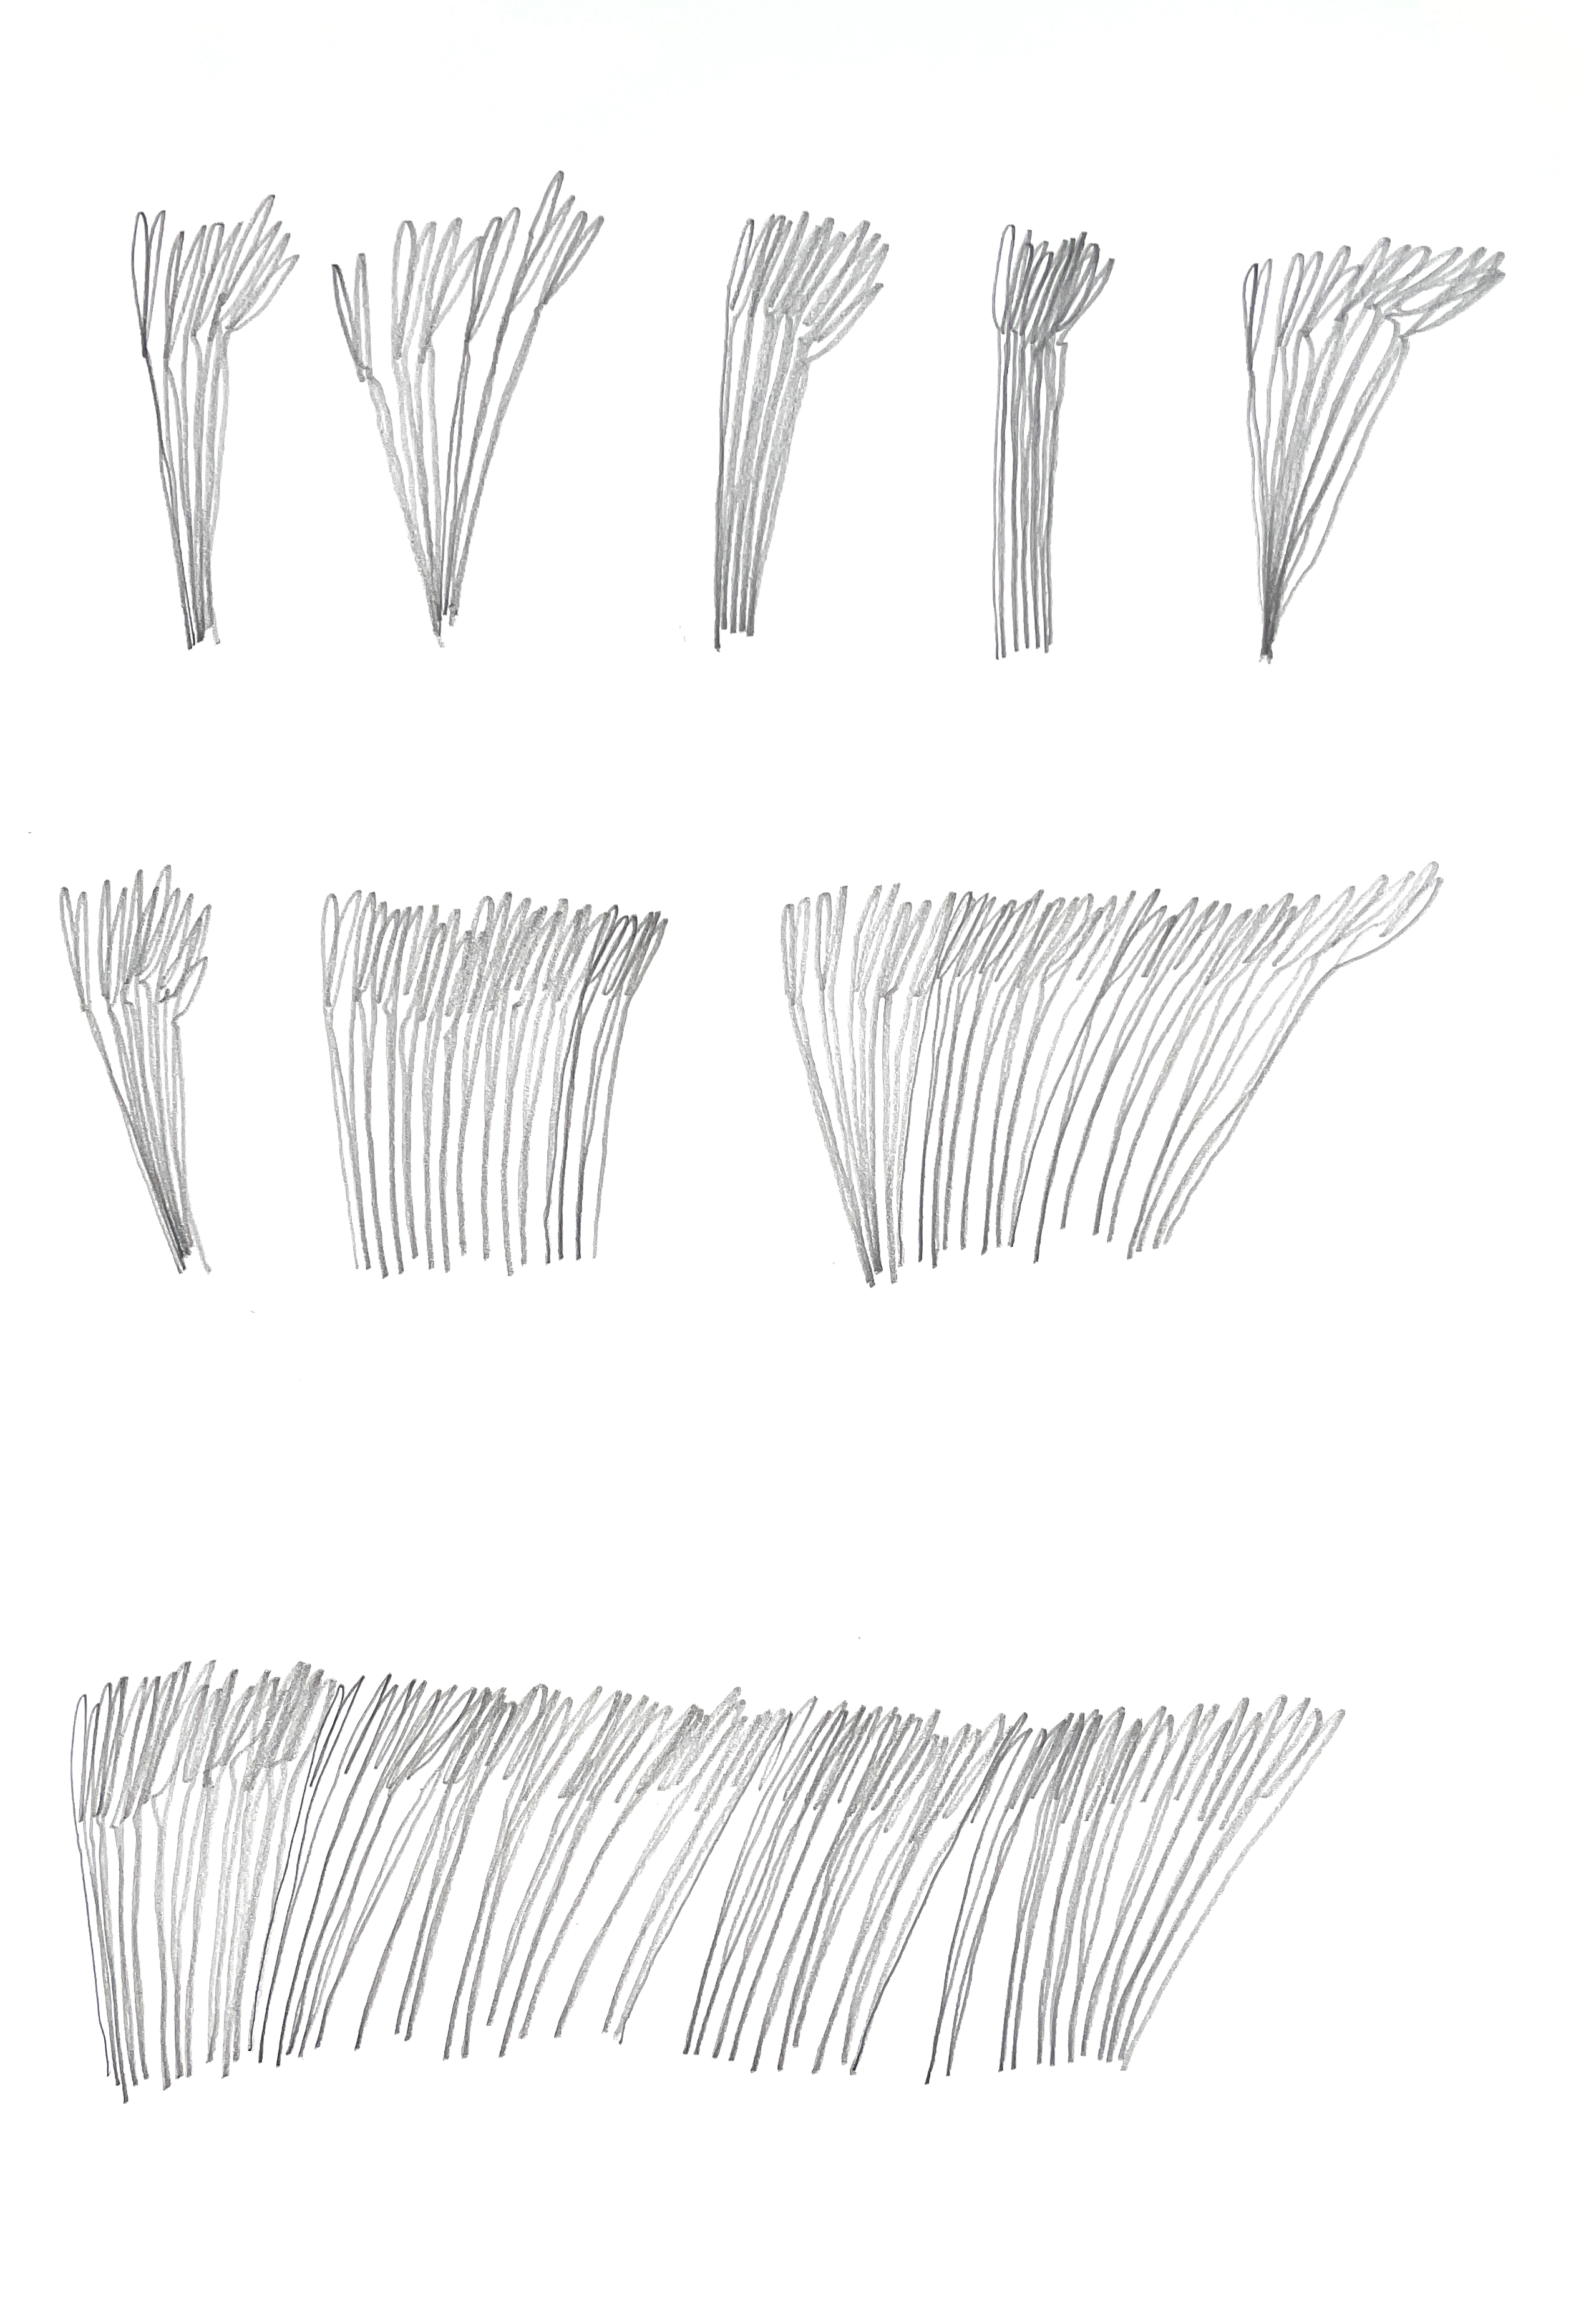 pencil drawings of groups of reeds in various widths